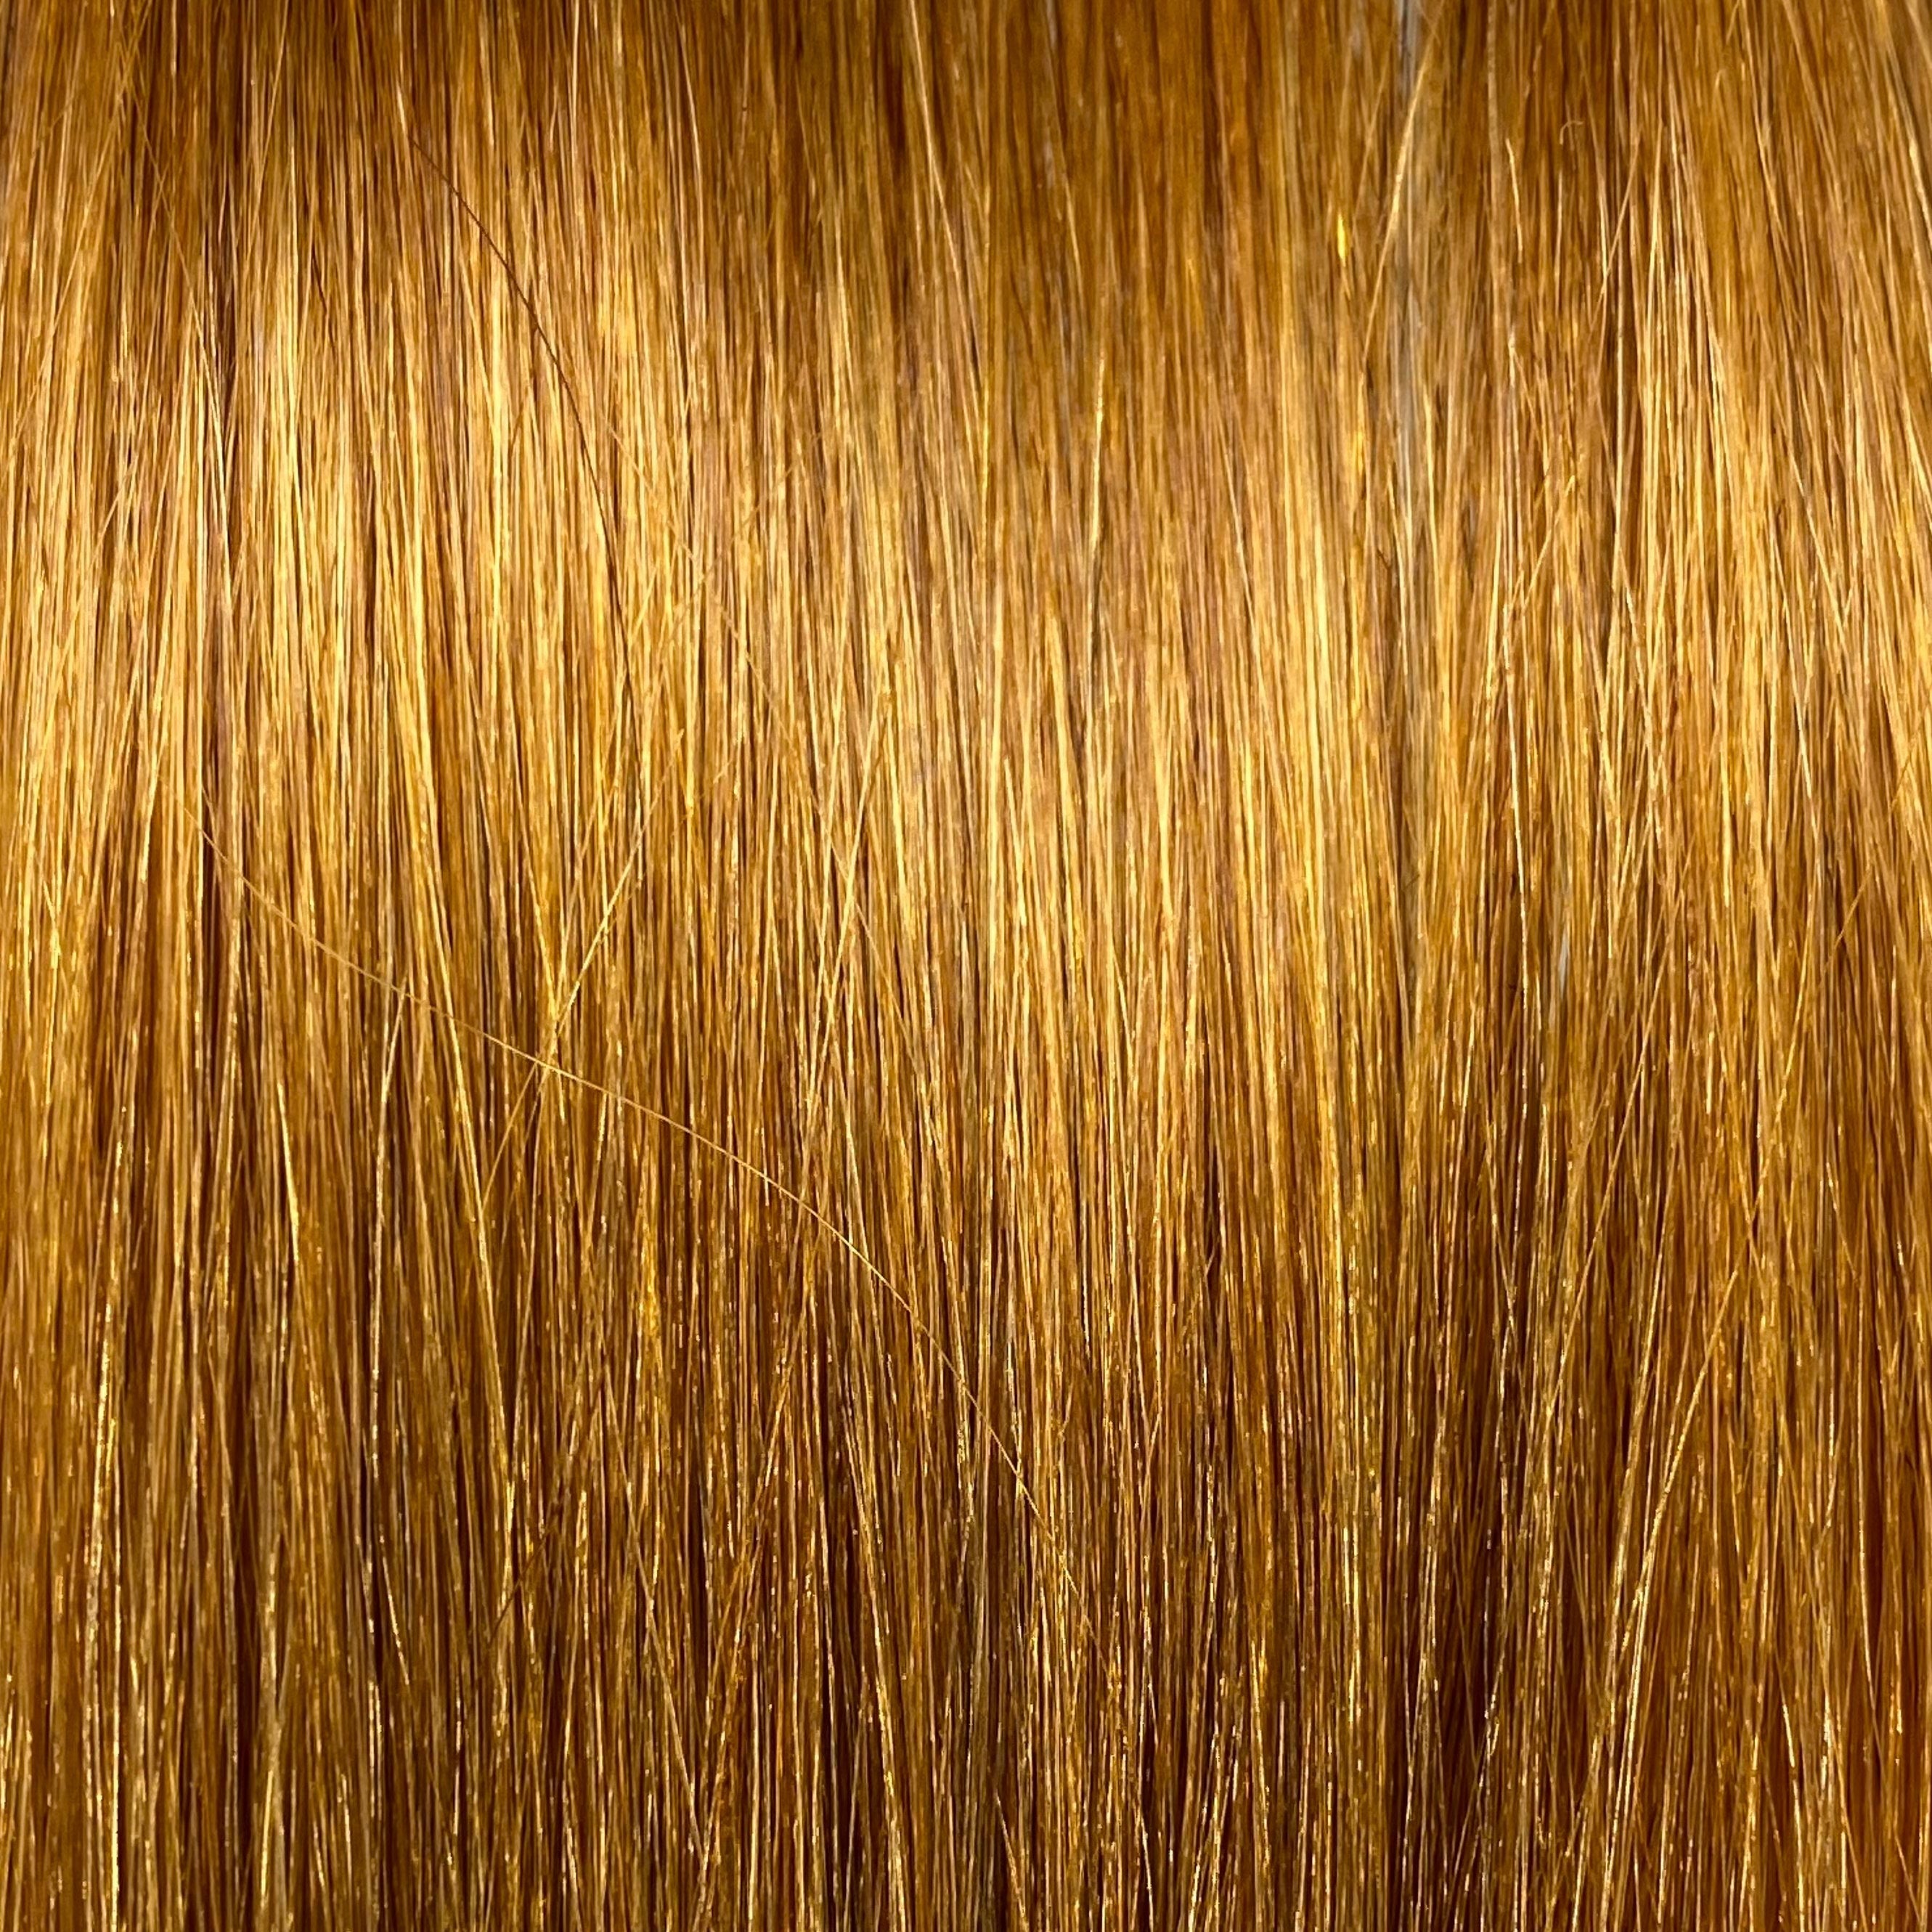 FUSION #27 GOLDEN BLONDE 50CM/ 20 INCHES  -  20 GRAMS - Image 1